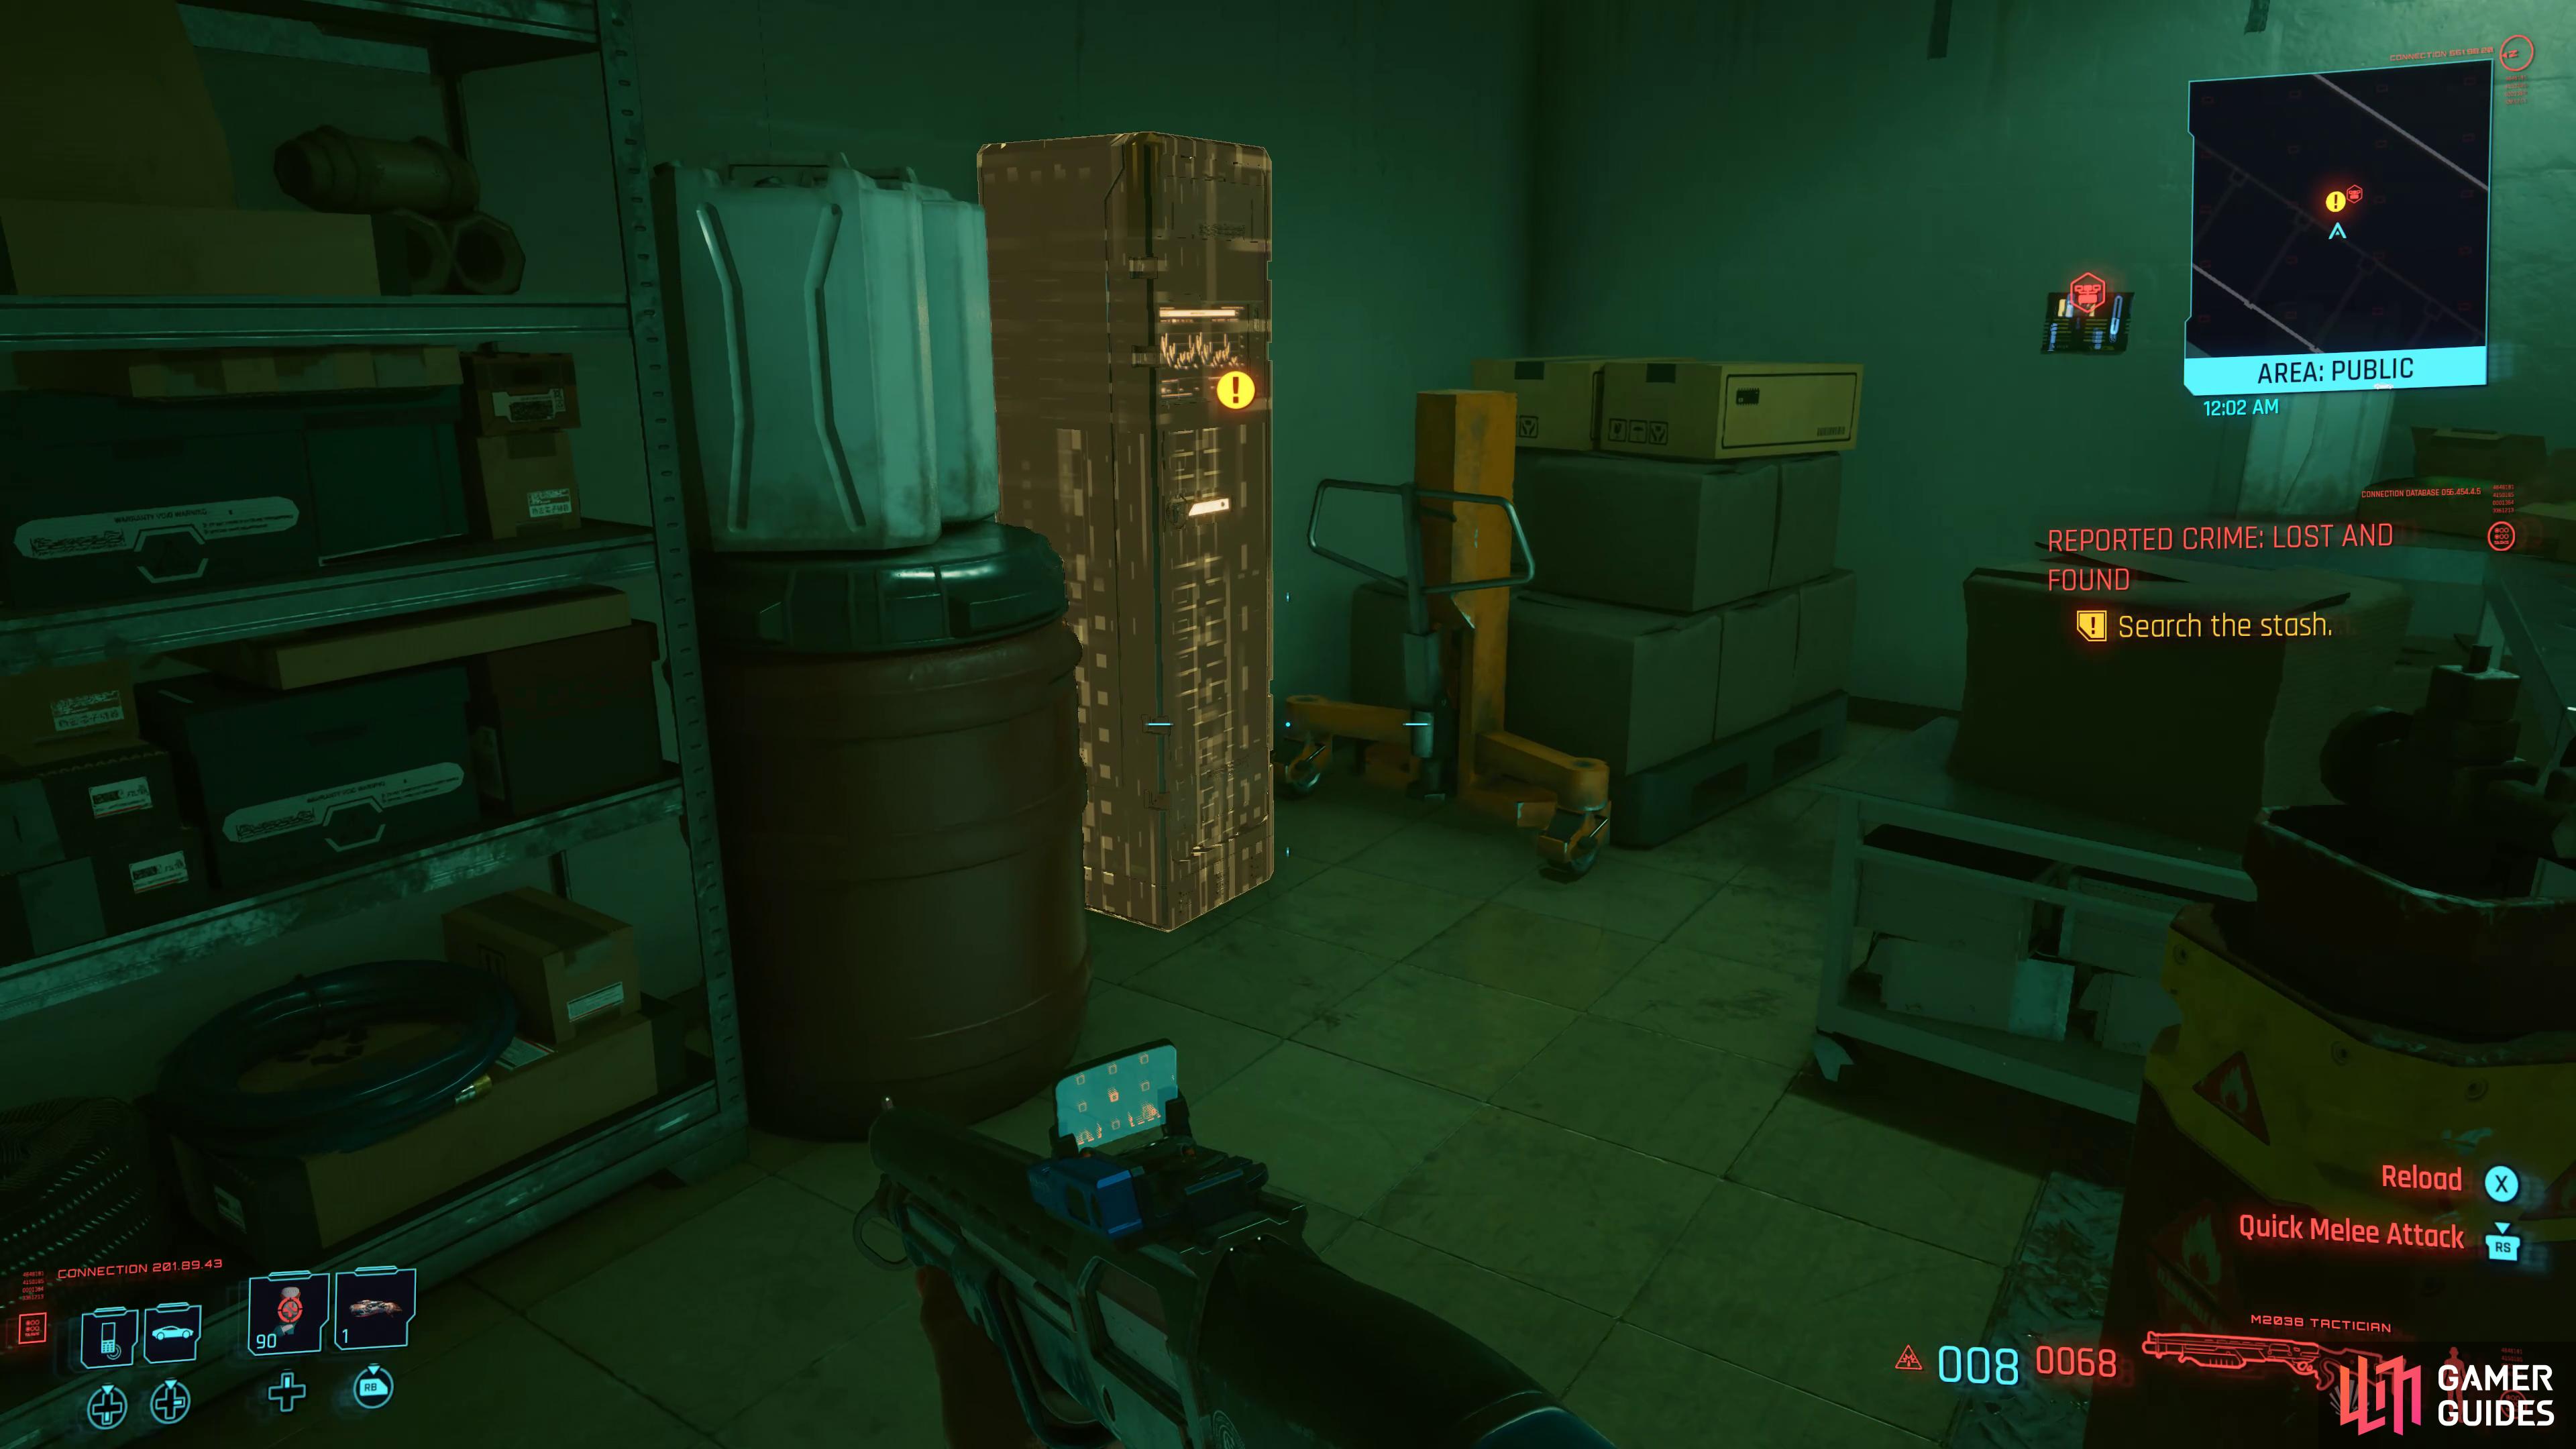 loot the locker in the garage once the area is clear.